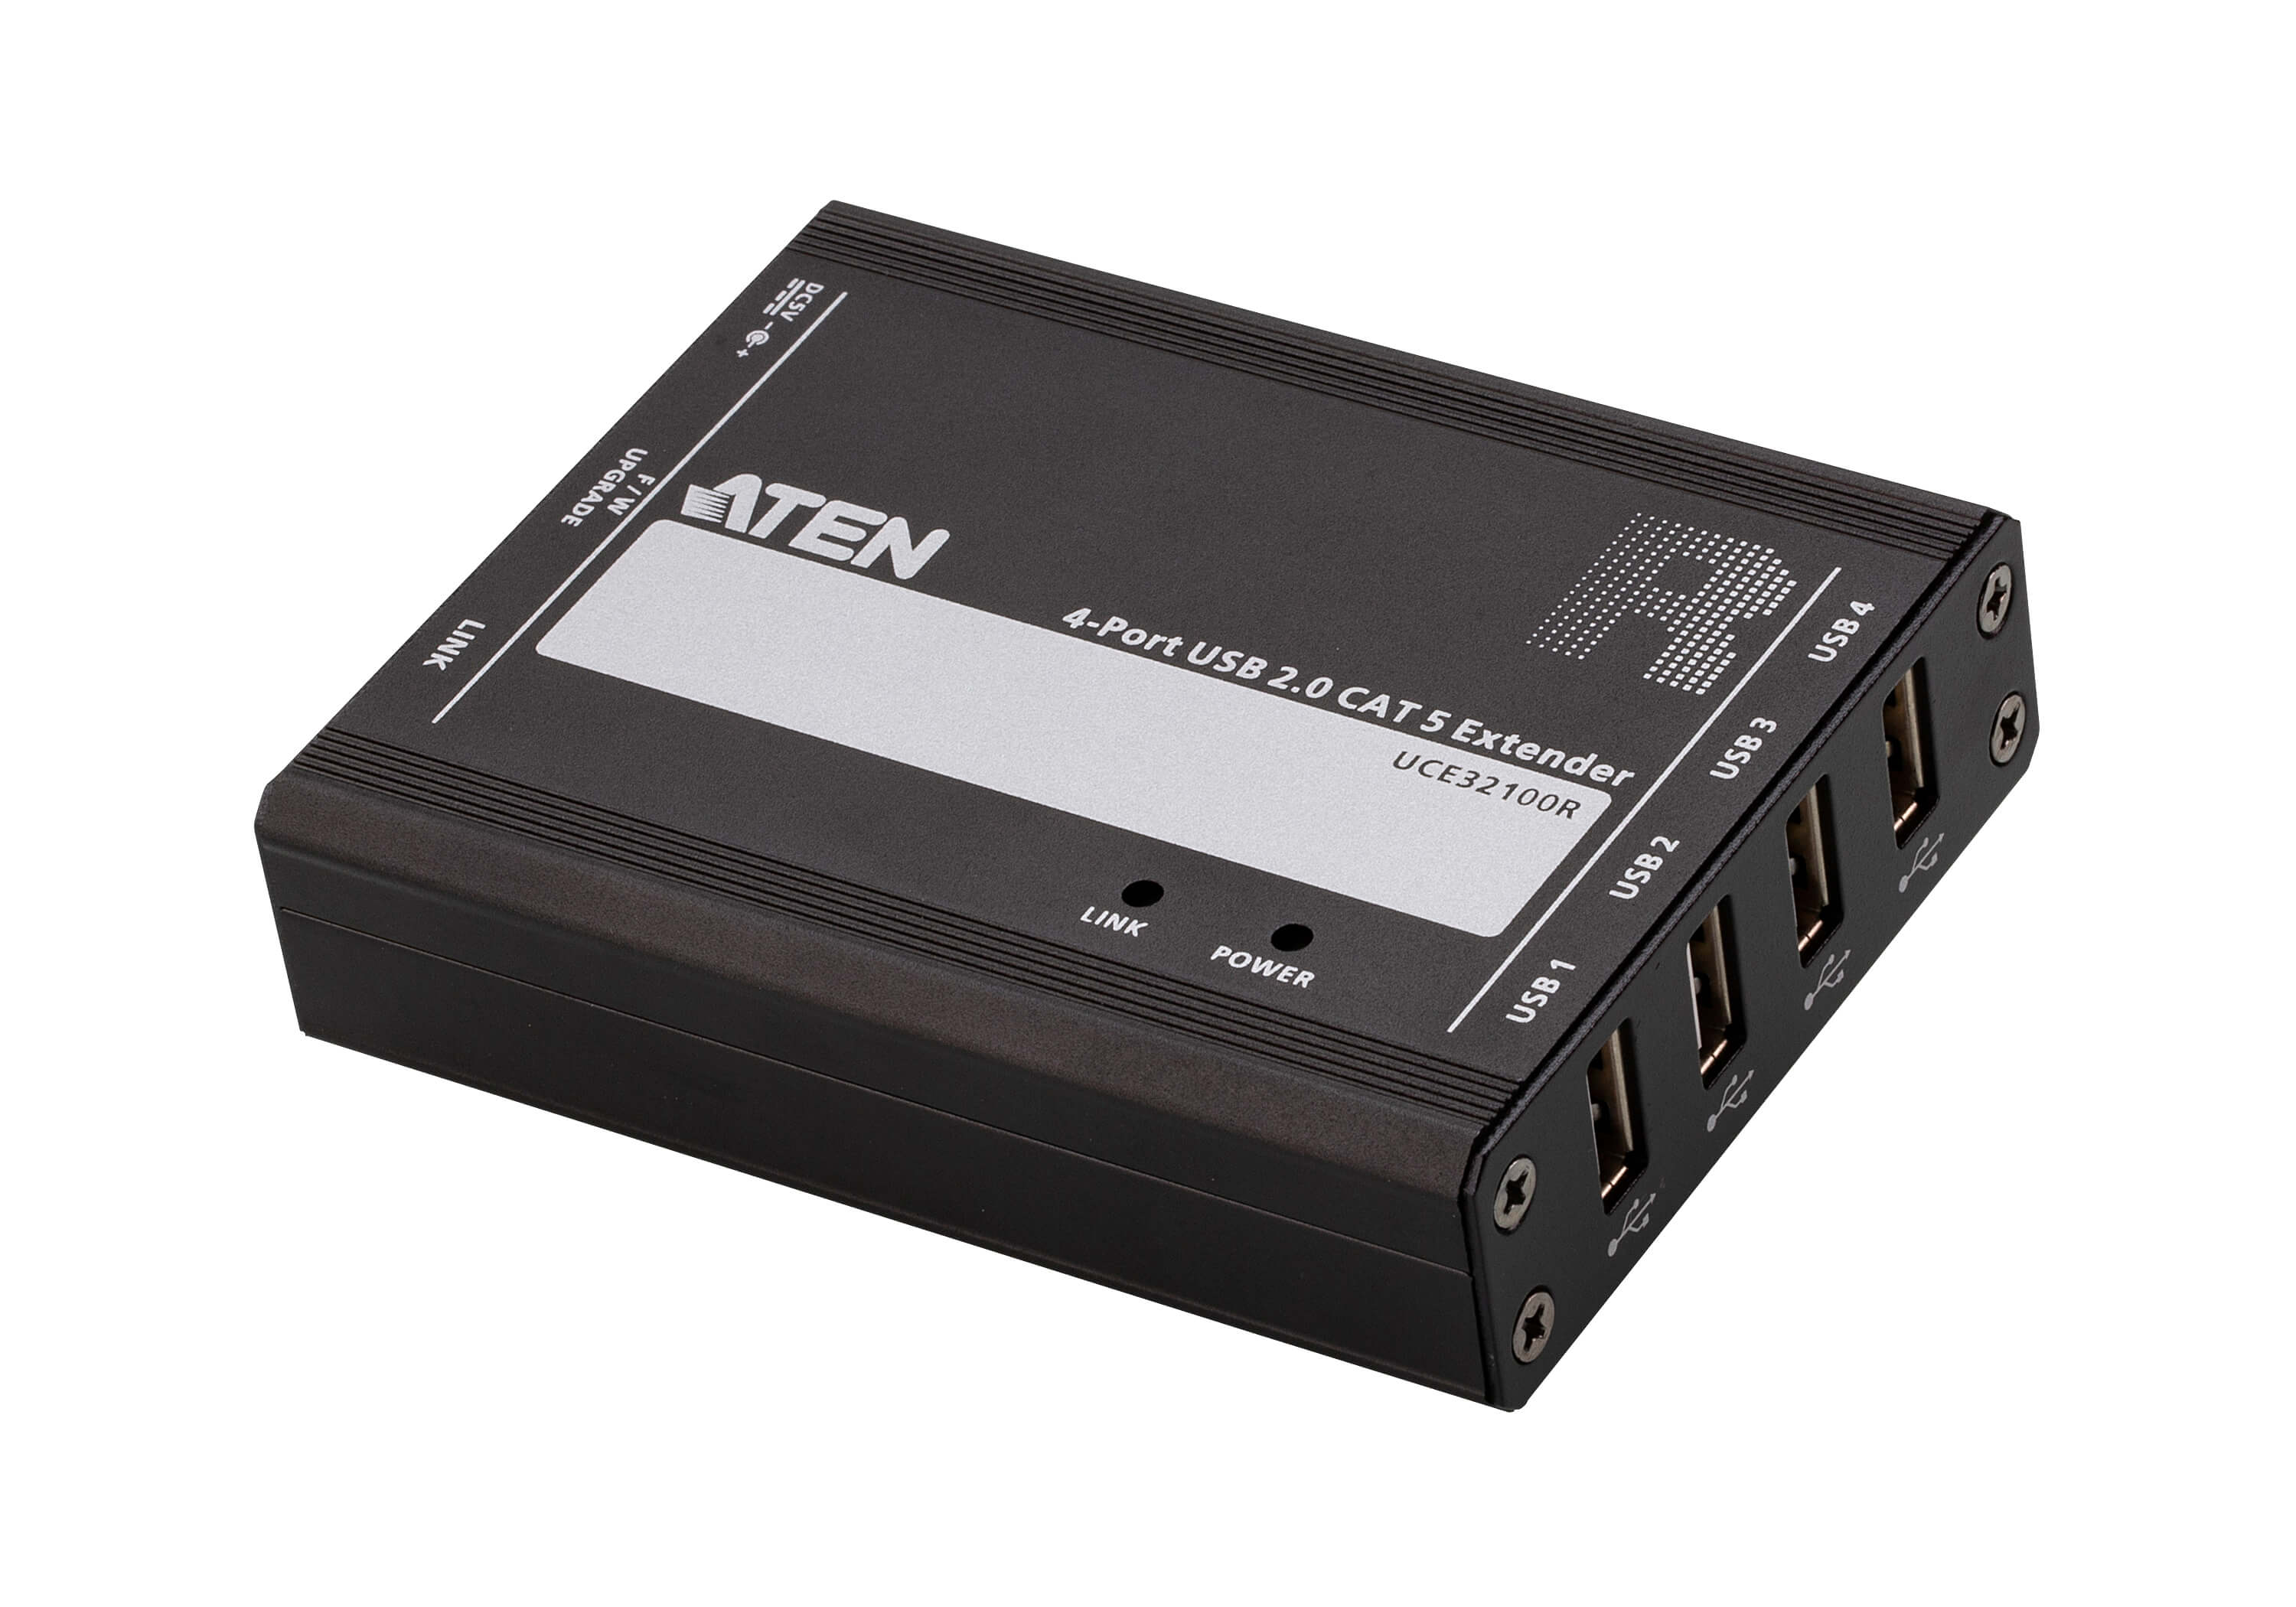 You Recently Viewed Aten UCE32100 4-port USB 2.0 CAT 5 Extender (100m) Image